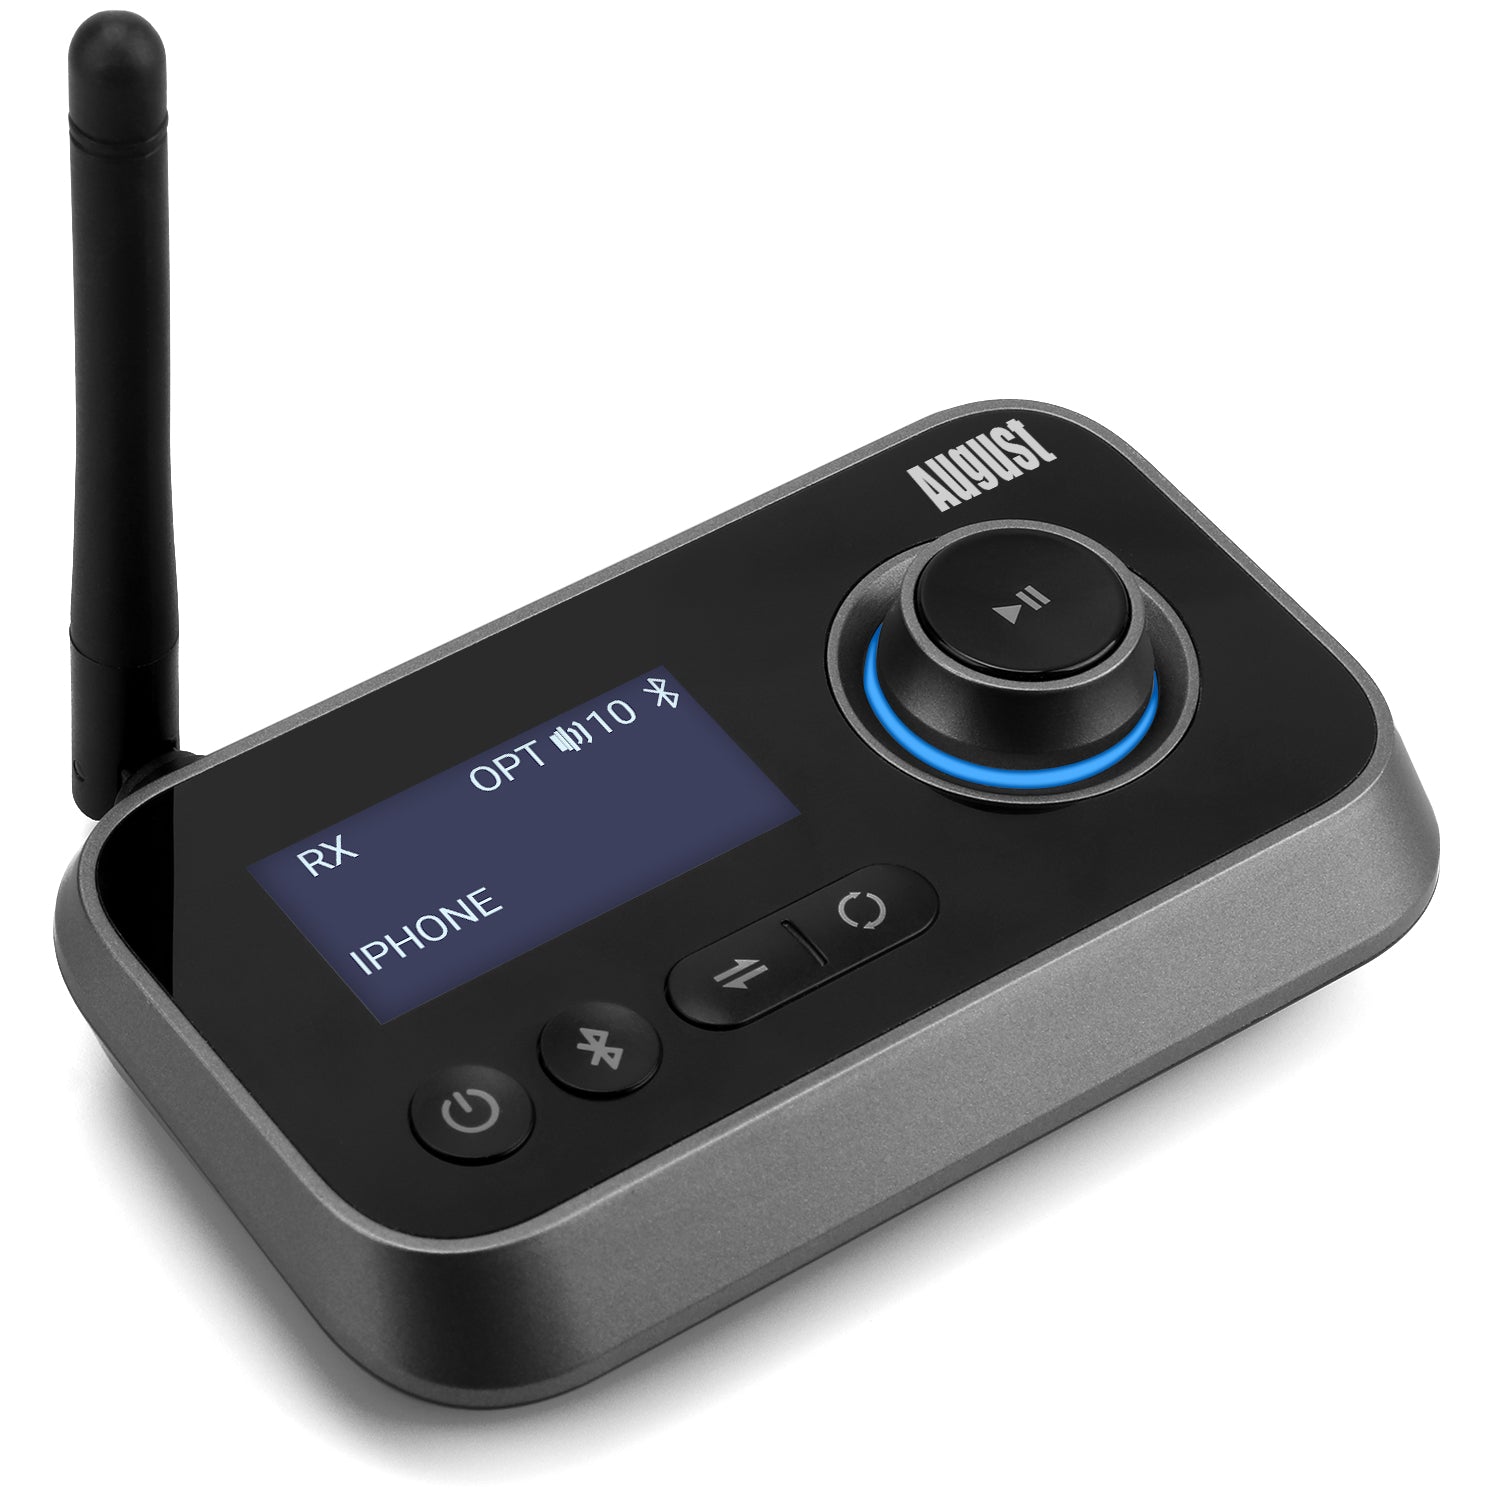 August Bluetooth Dual Audio Transmitter And Receiver